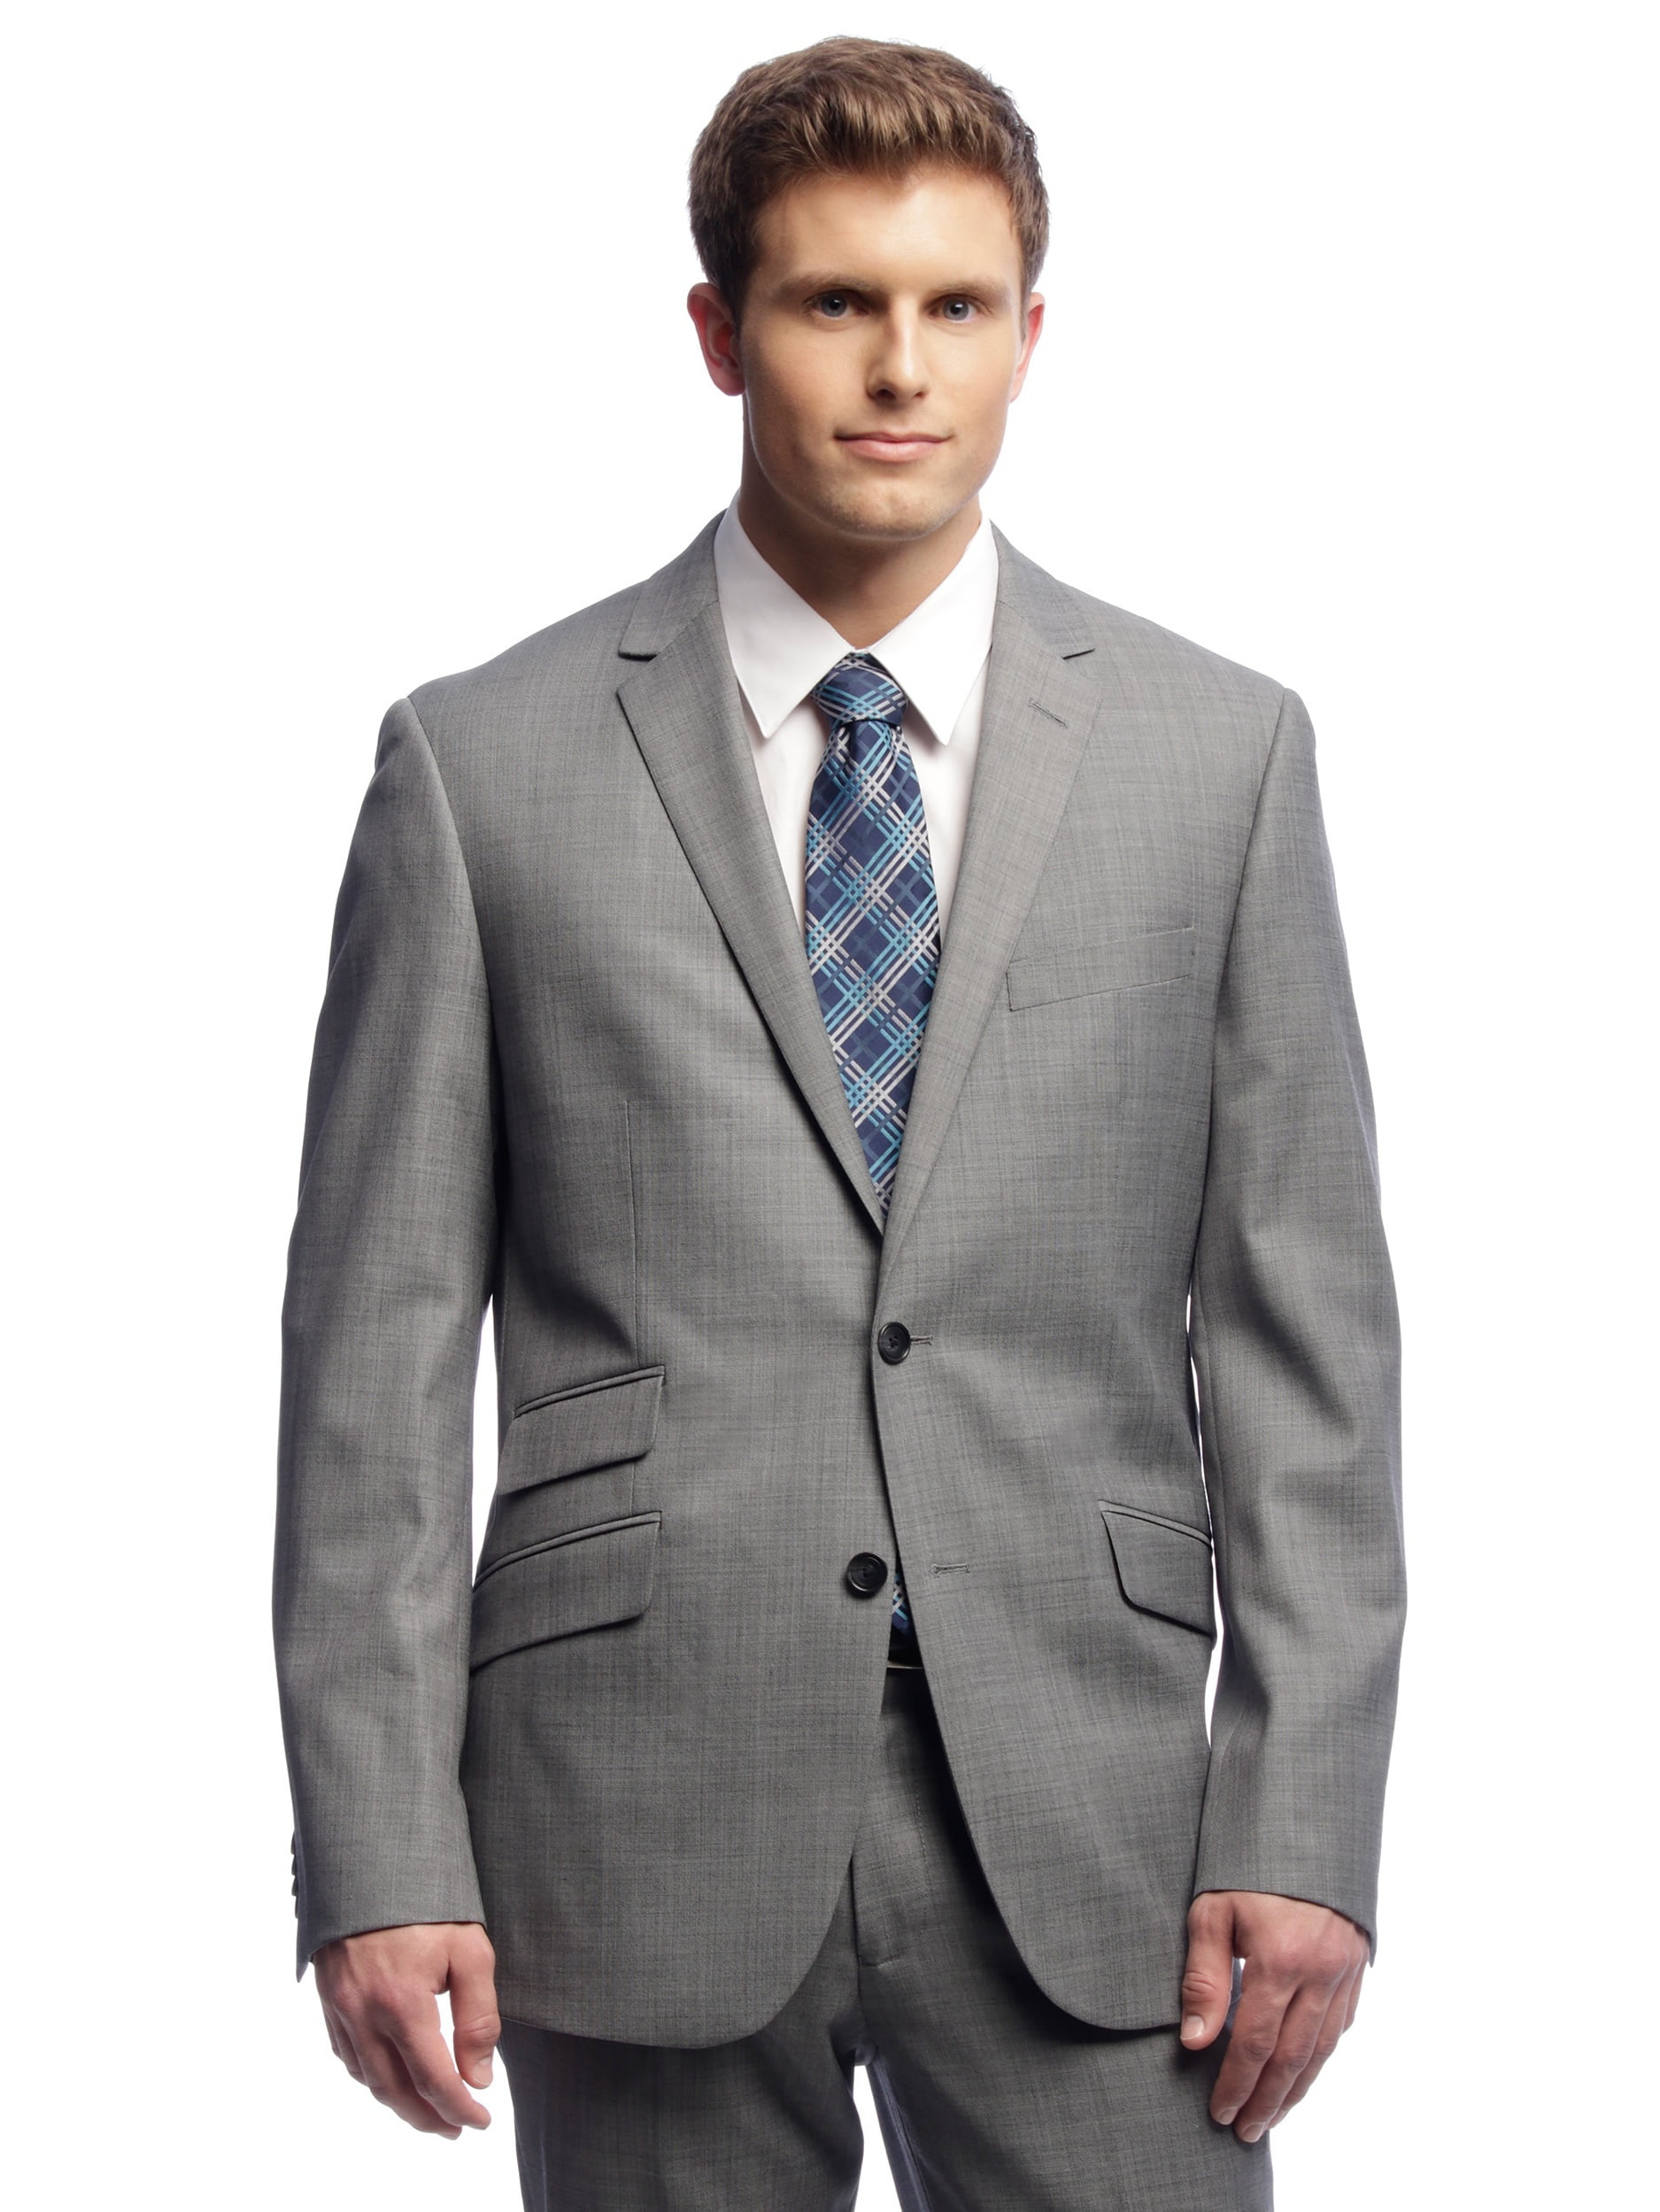 Kenneth Cole - Kenneth Cole New York Men's Trim Fit Grey Suit Separates ...